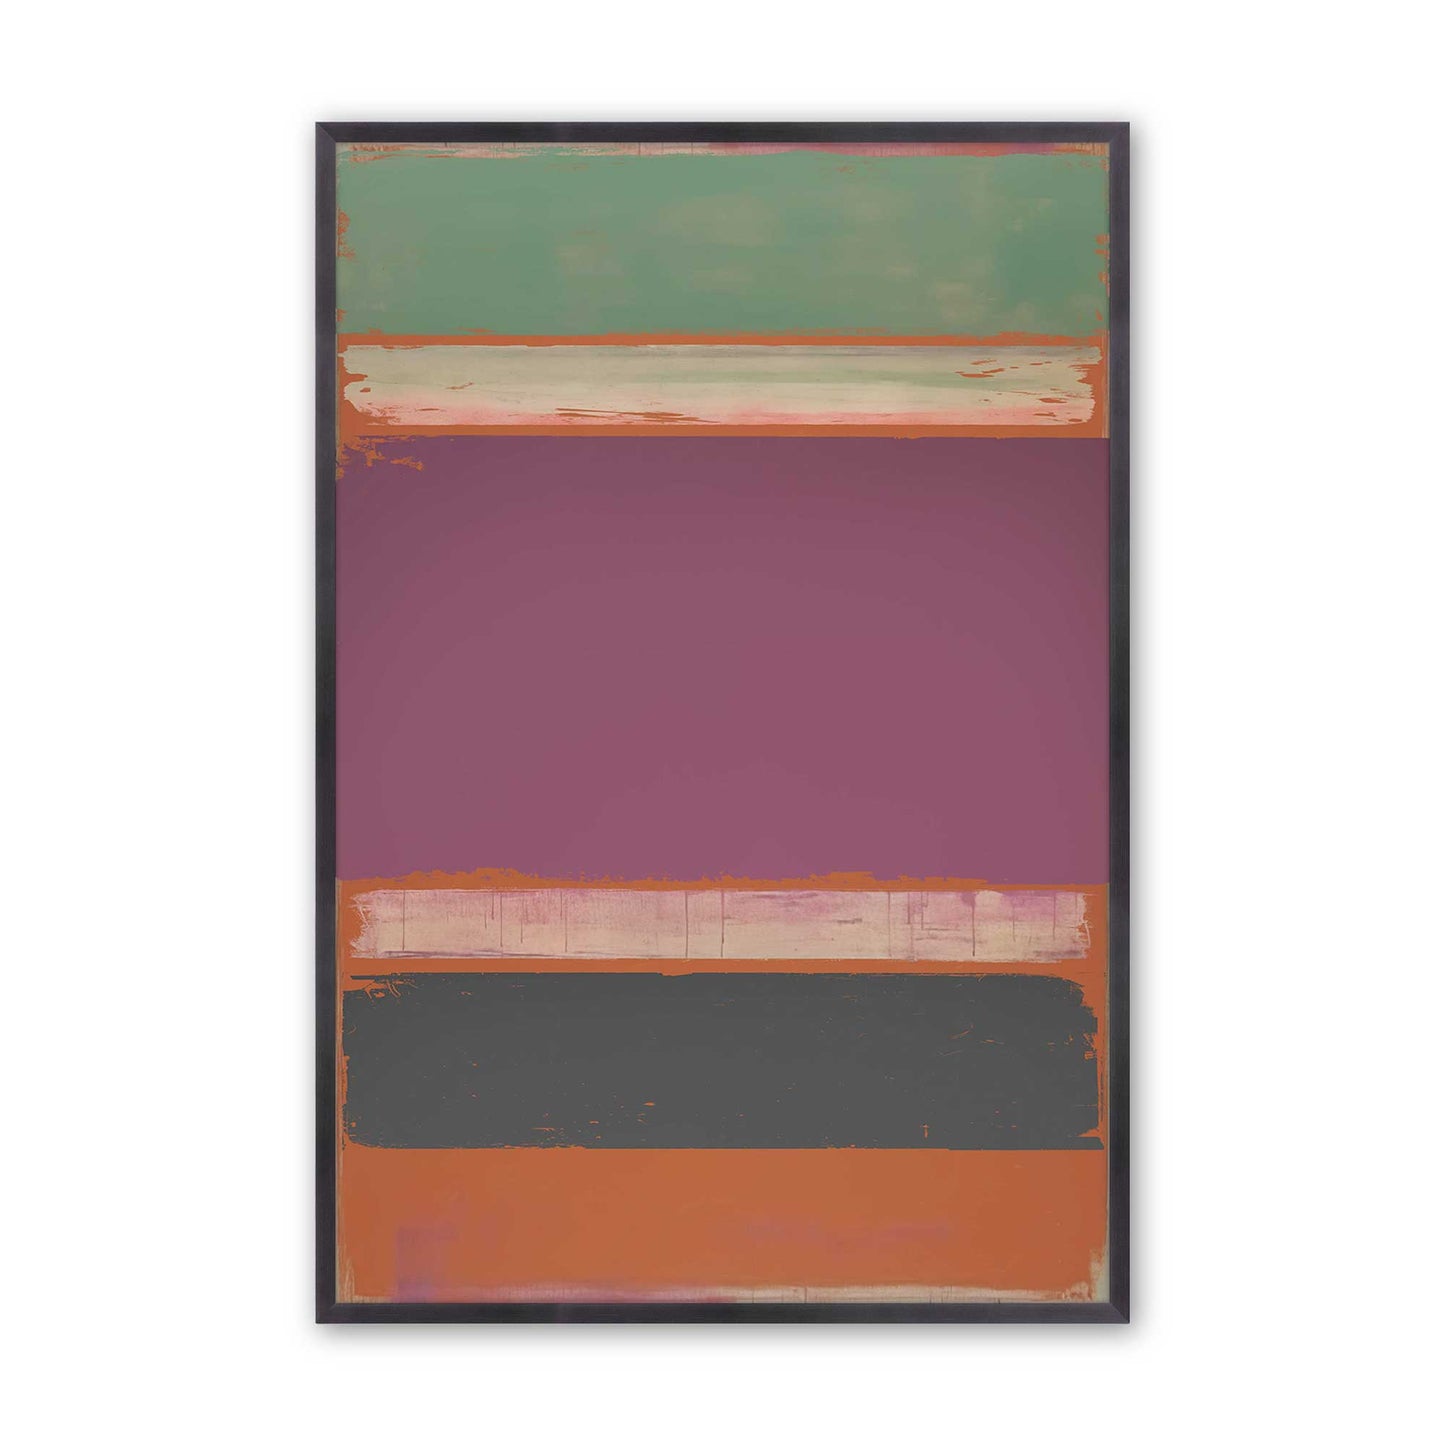 [Color:Weathered Zinc], Picture of art in a Weathered Zinc frame